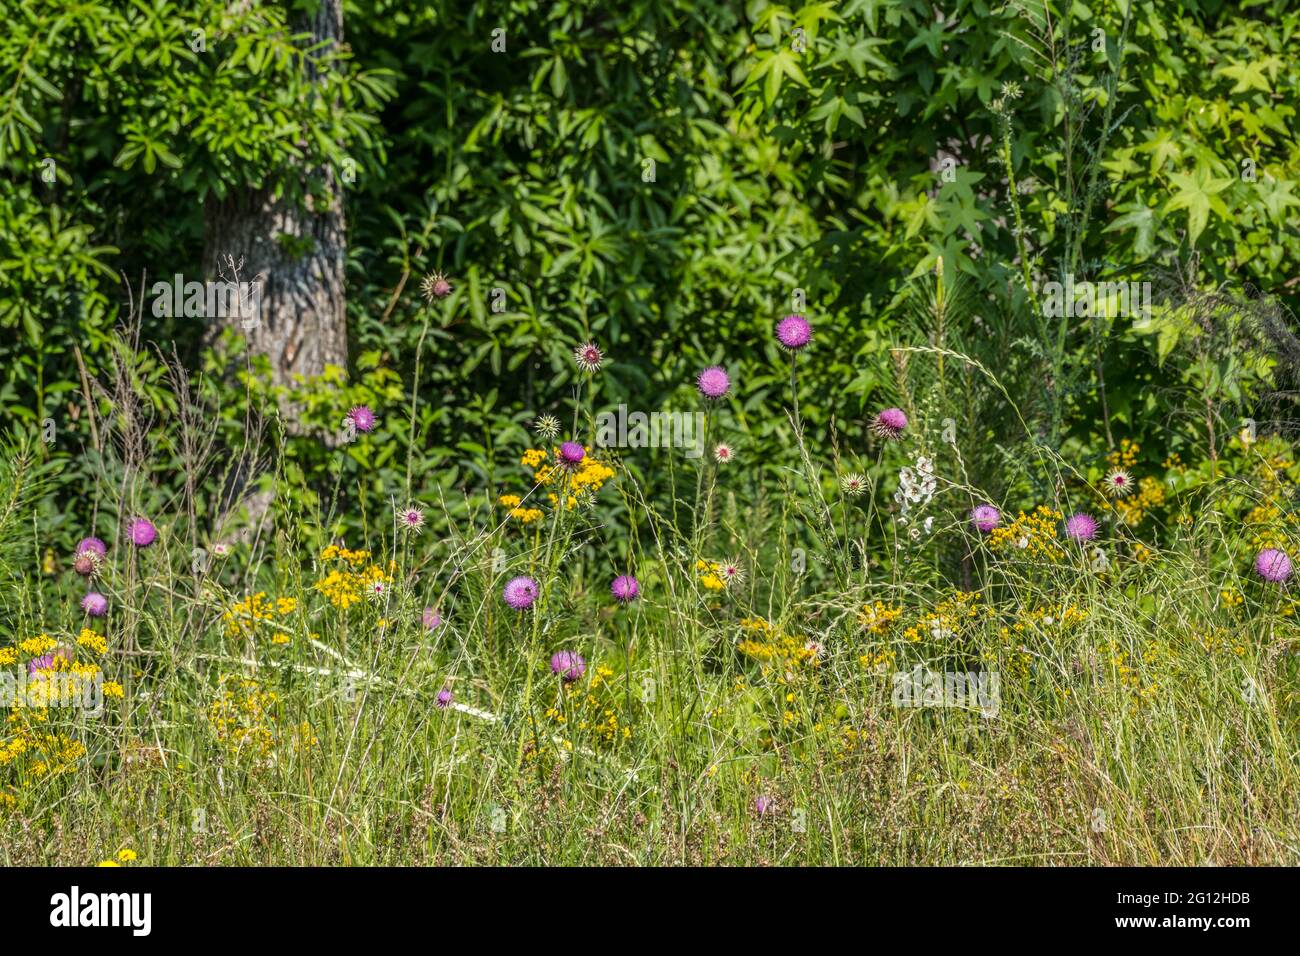 Variety of colorful tall wildflowers and grasses in a field along the roadside closeup with the woodlands in the background on a bright sunny day in l Stock Photo